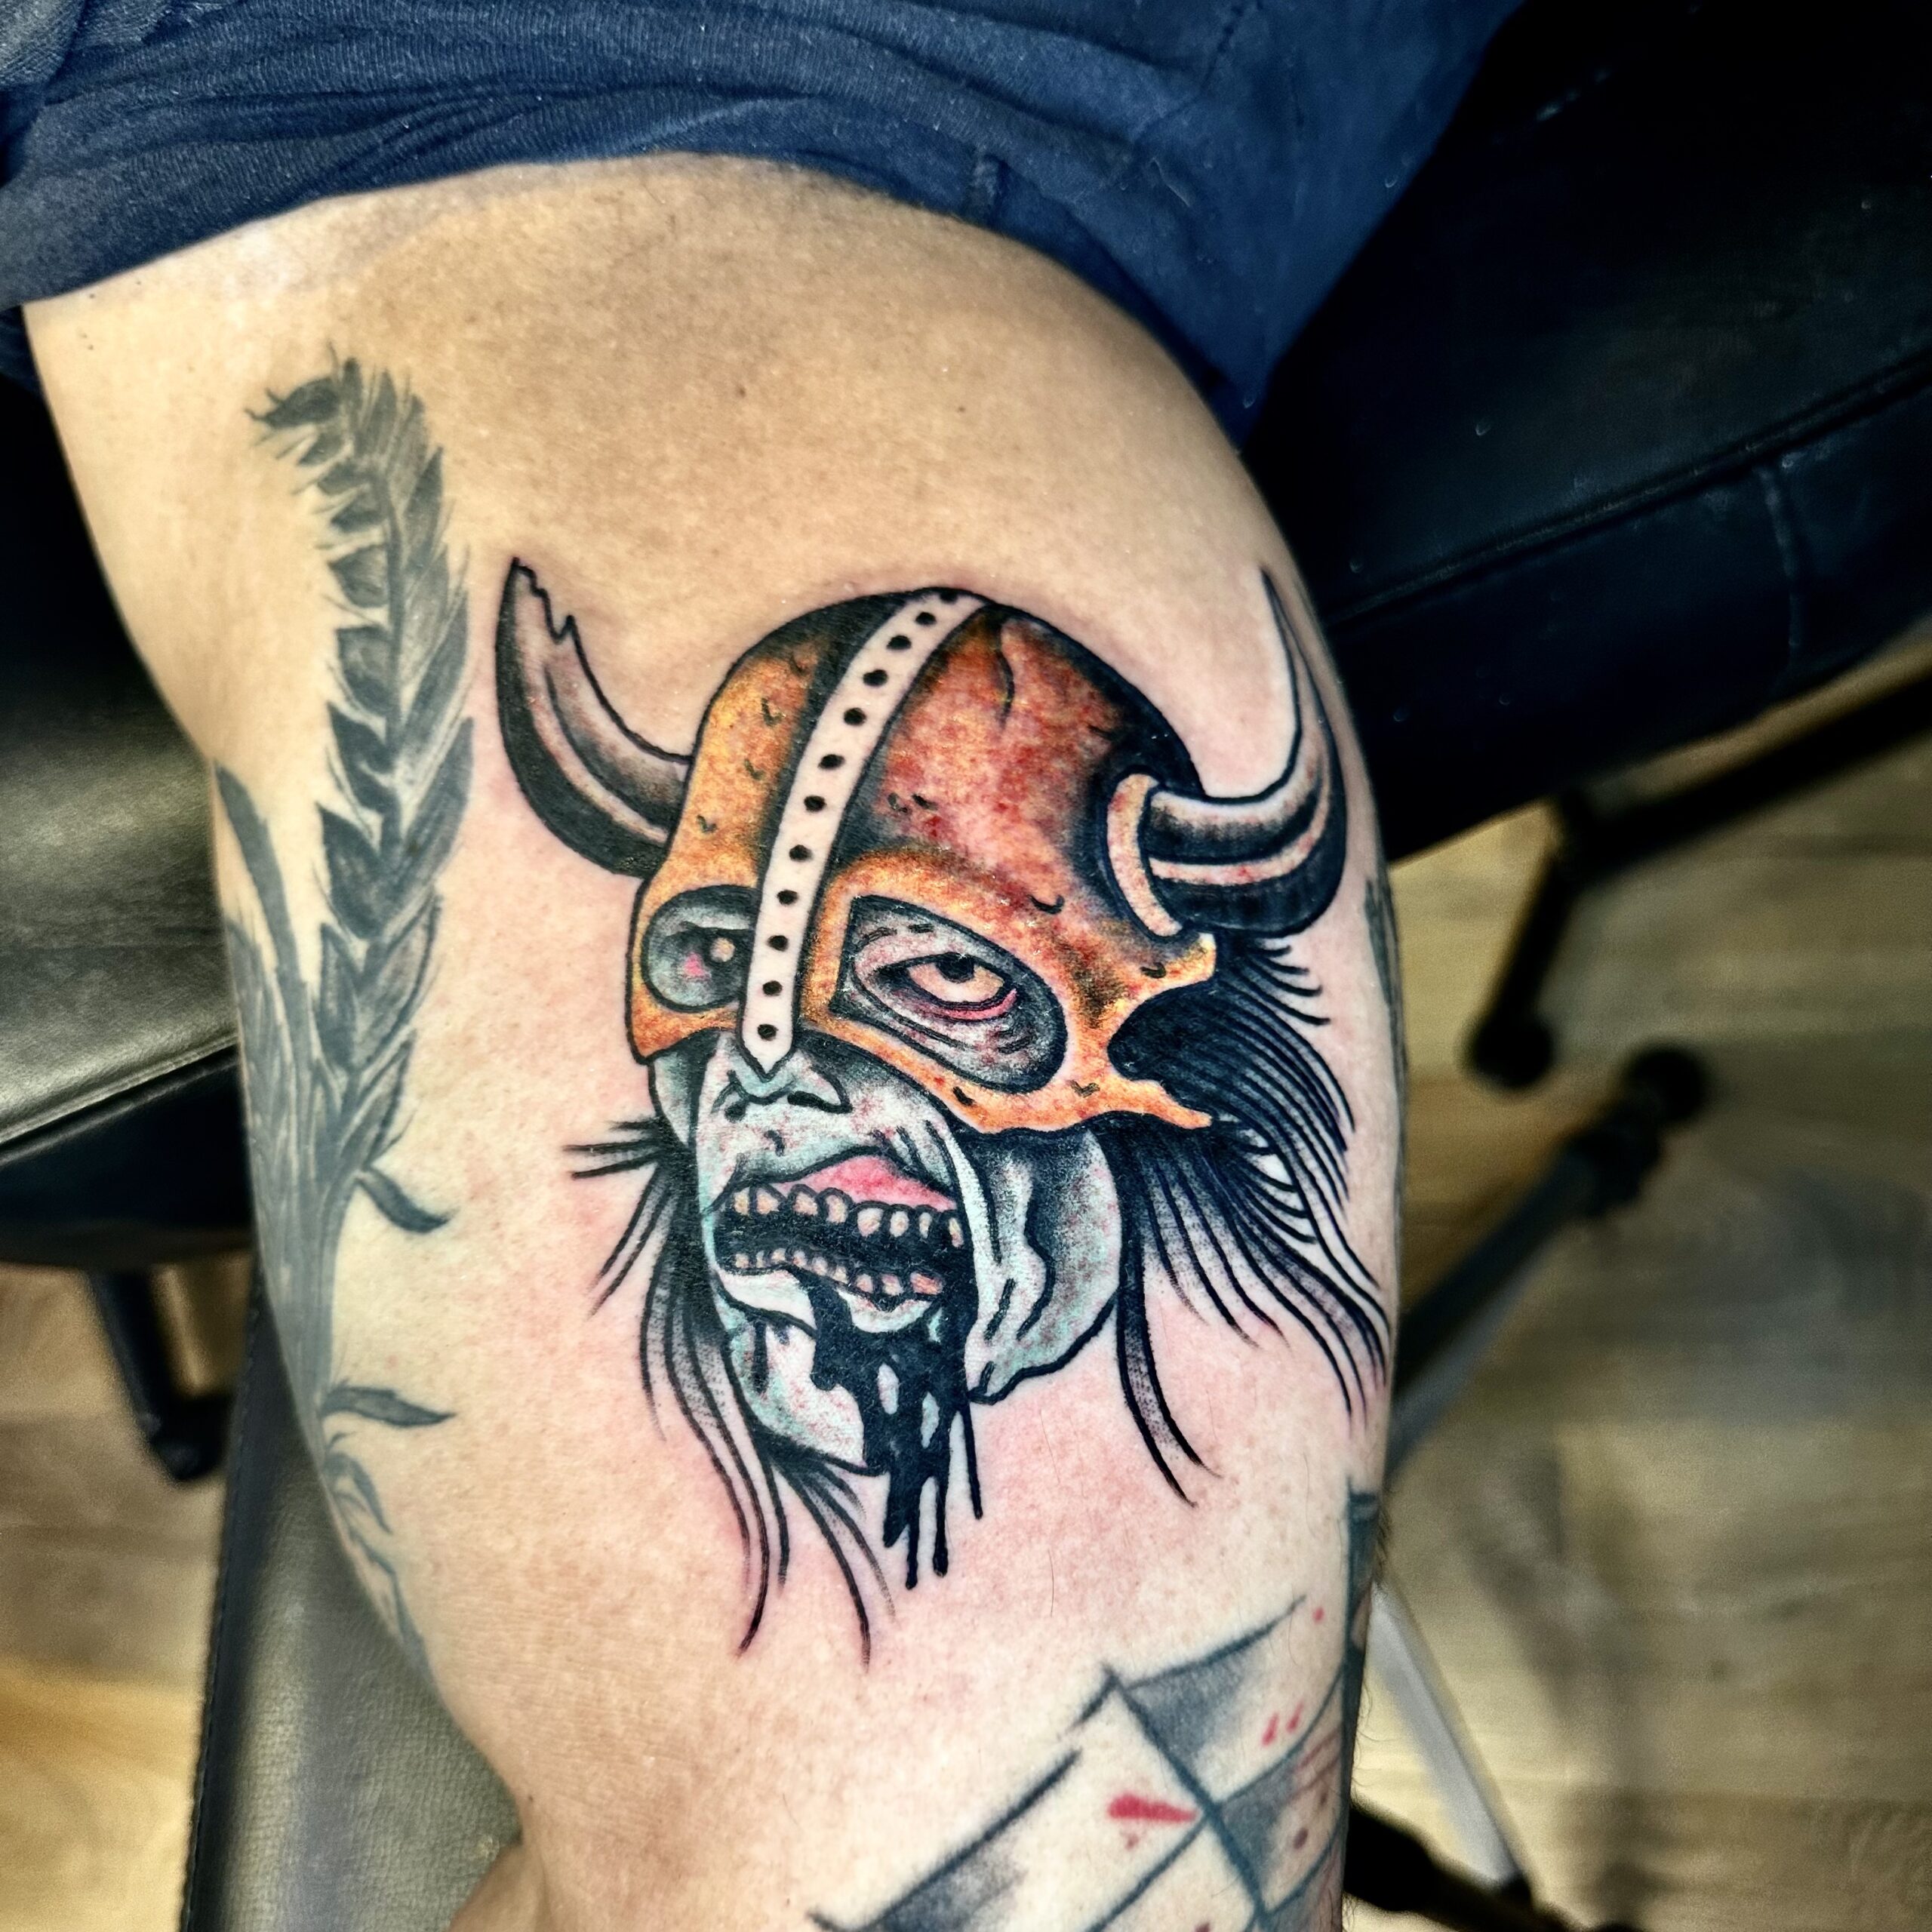 Tattoo of a zombie in a horned helmet